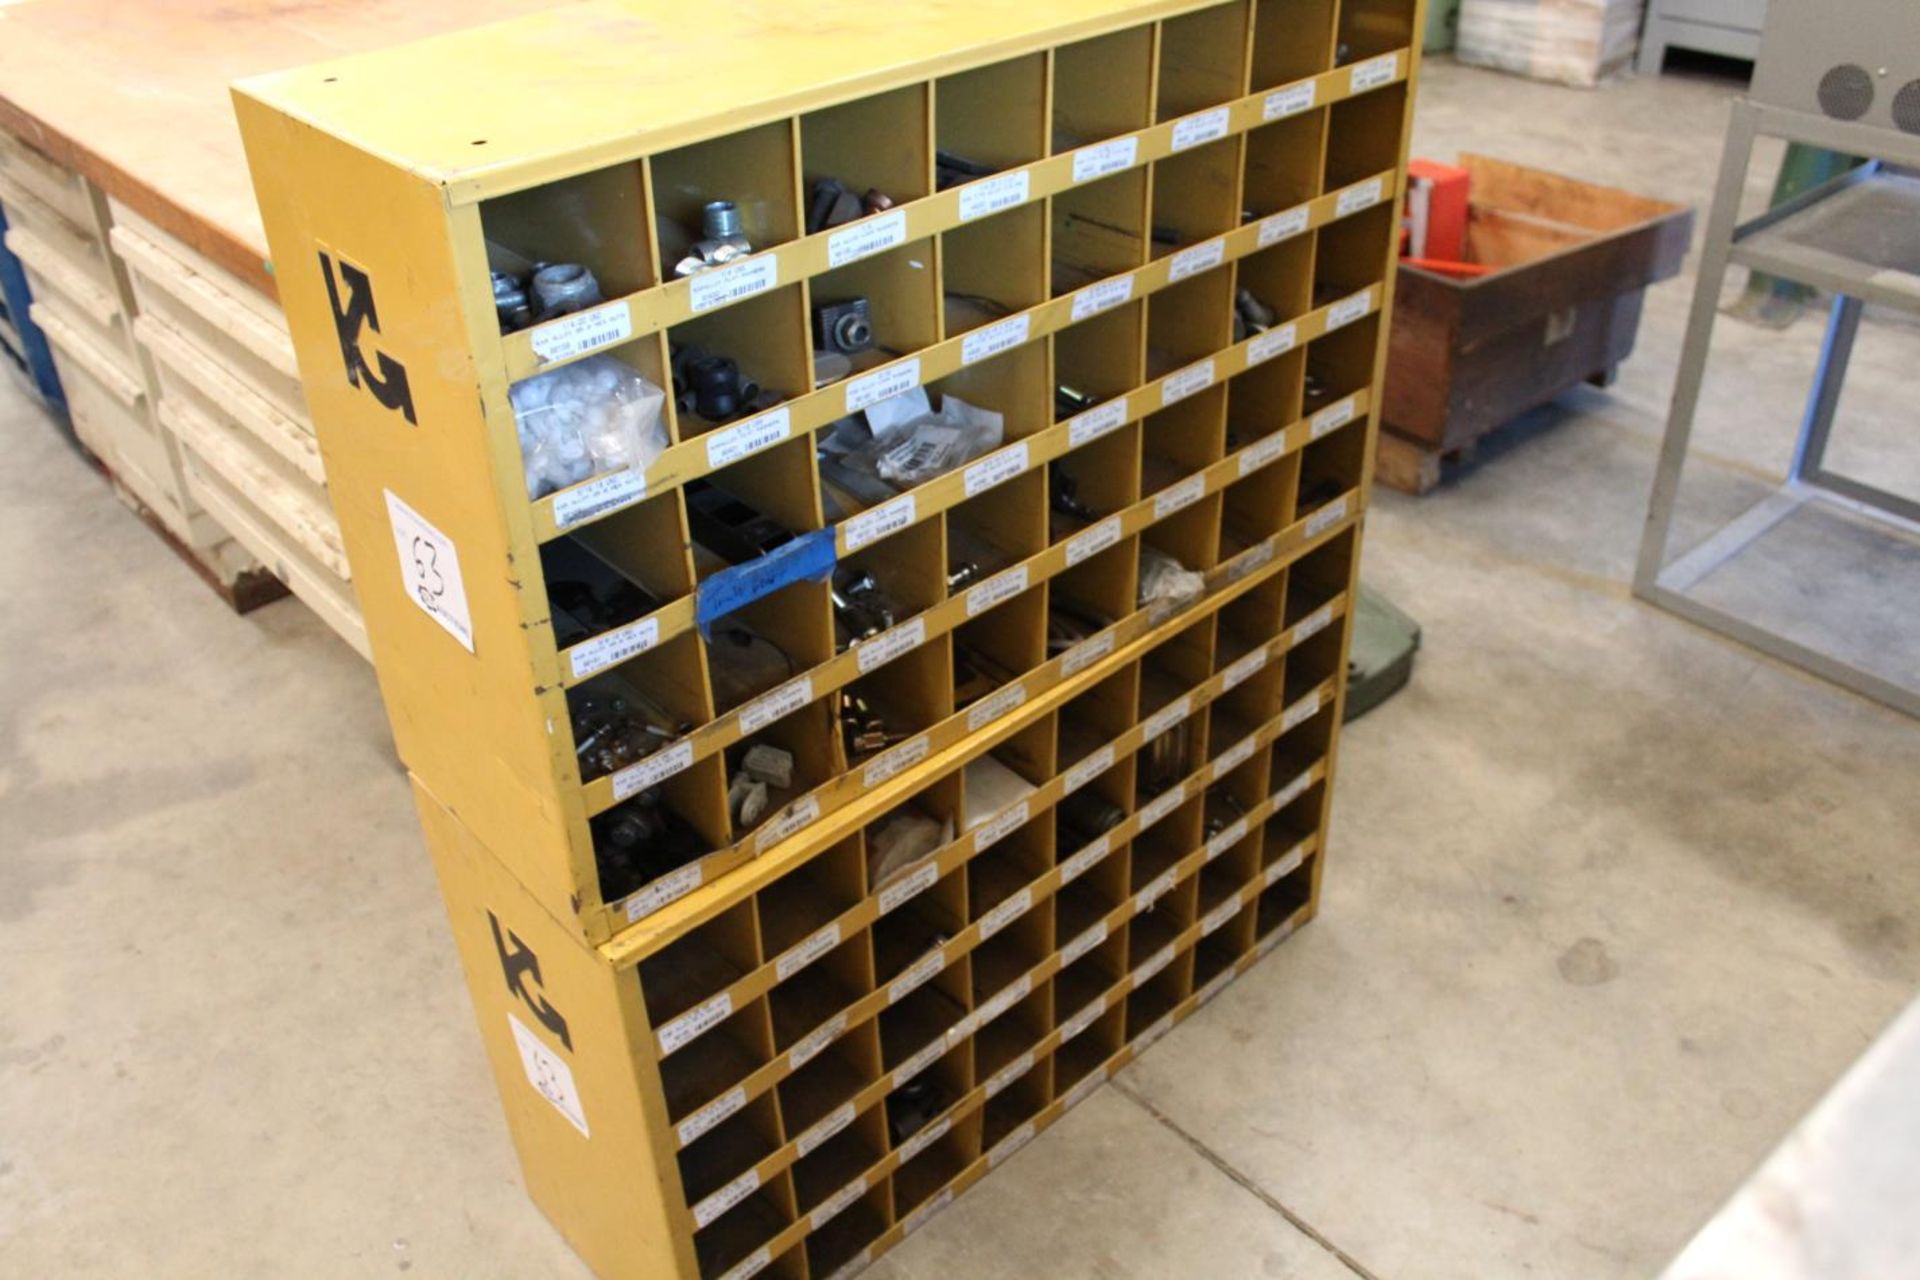 True Blue Pigeon Hole Hardware Cabinets 35" x 12" x 22"H each - Image 2 of 2